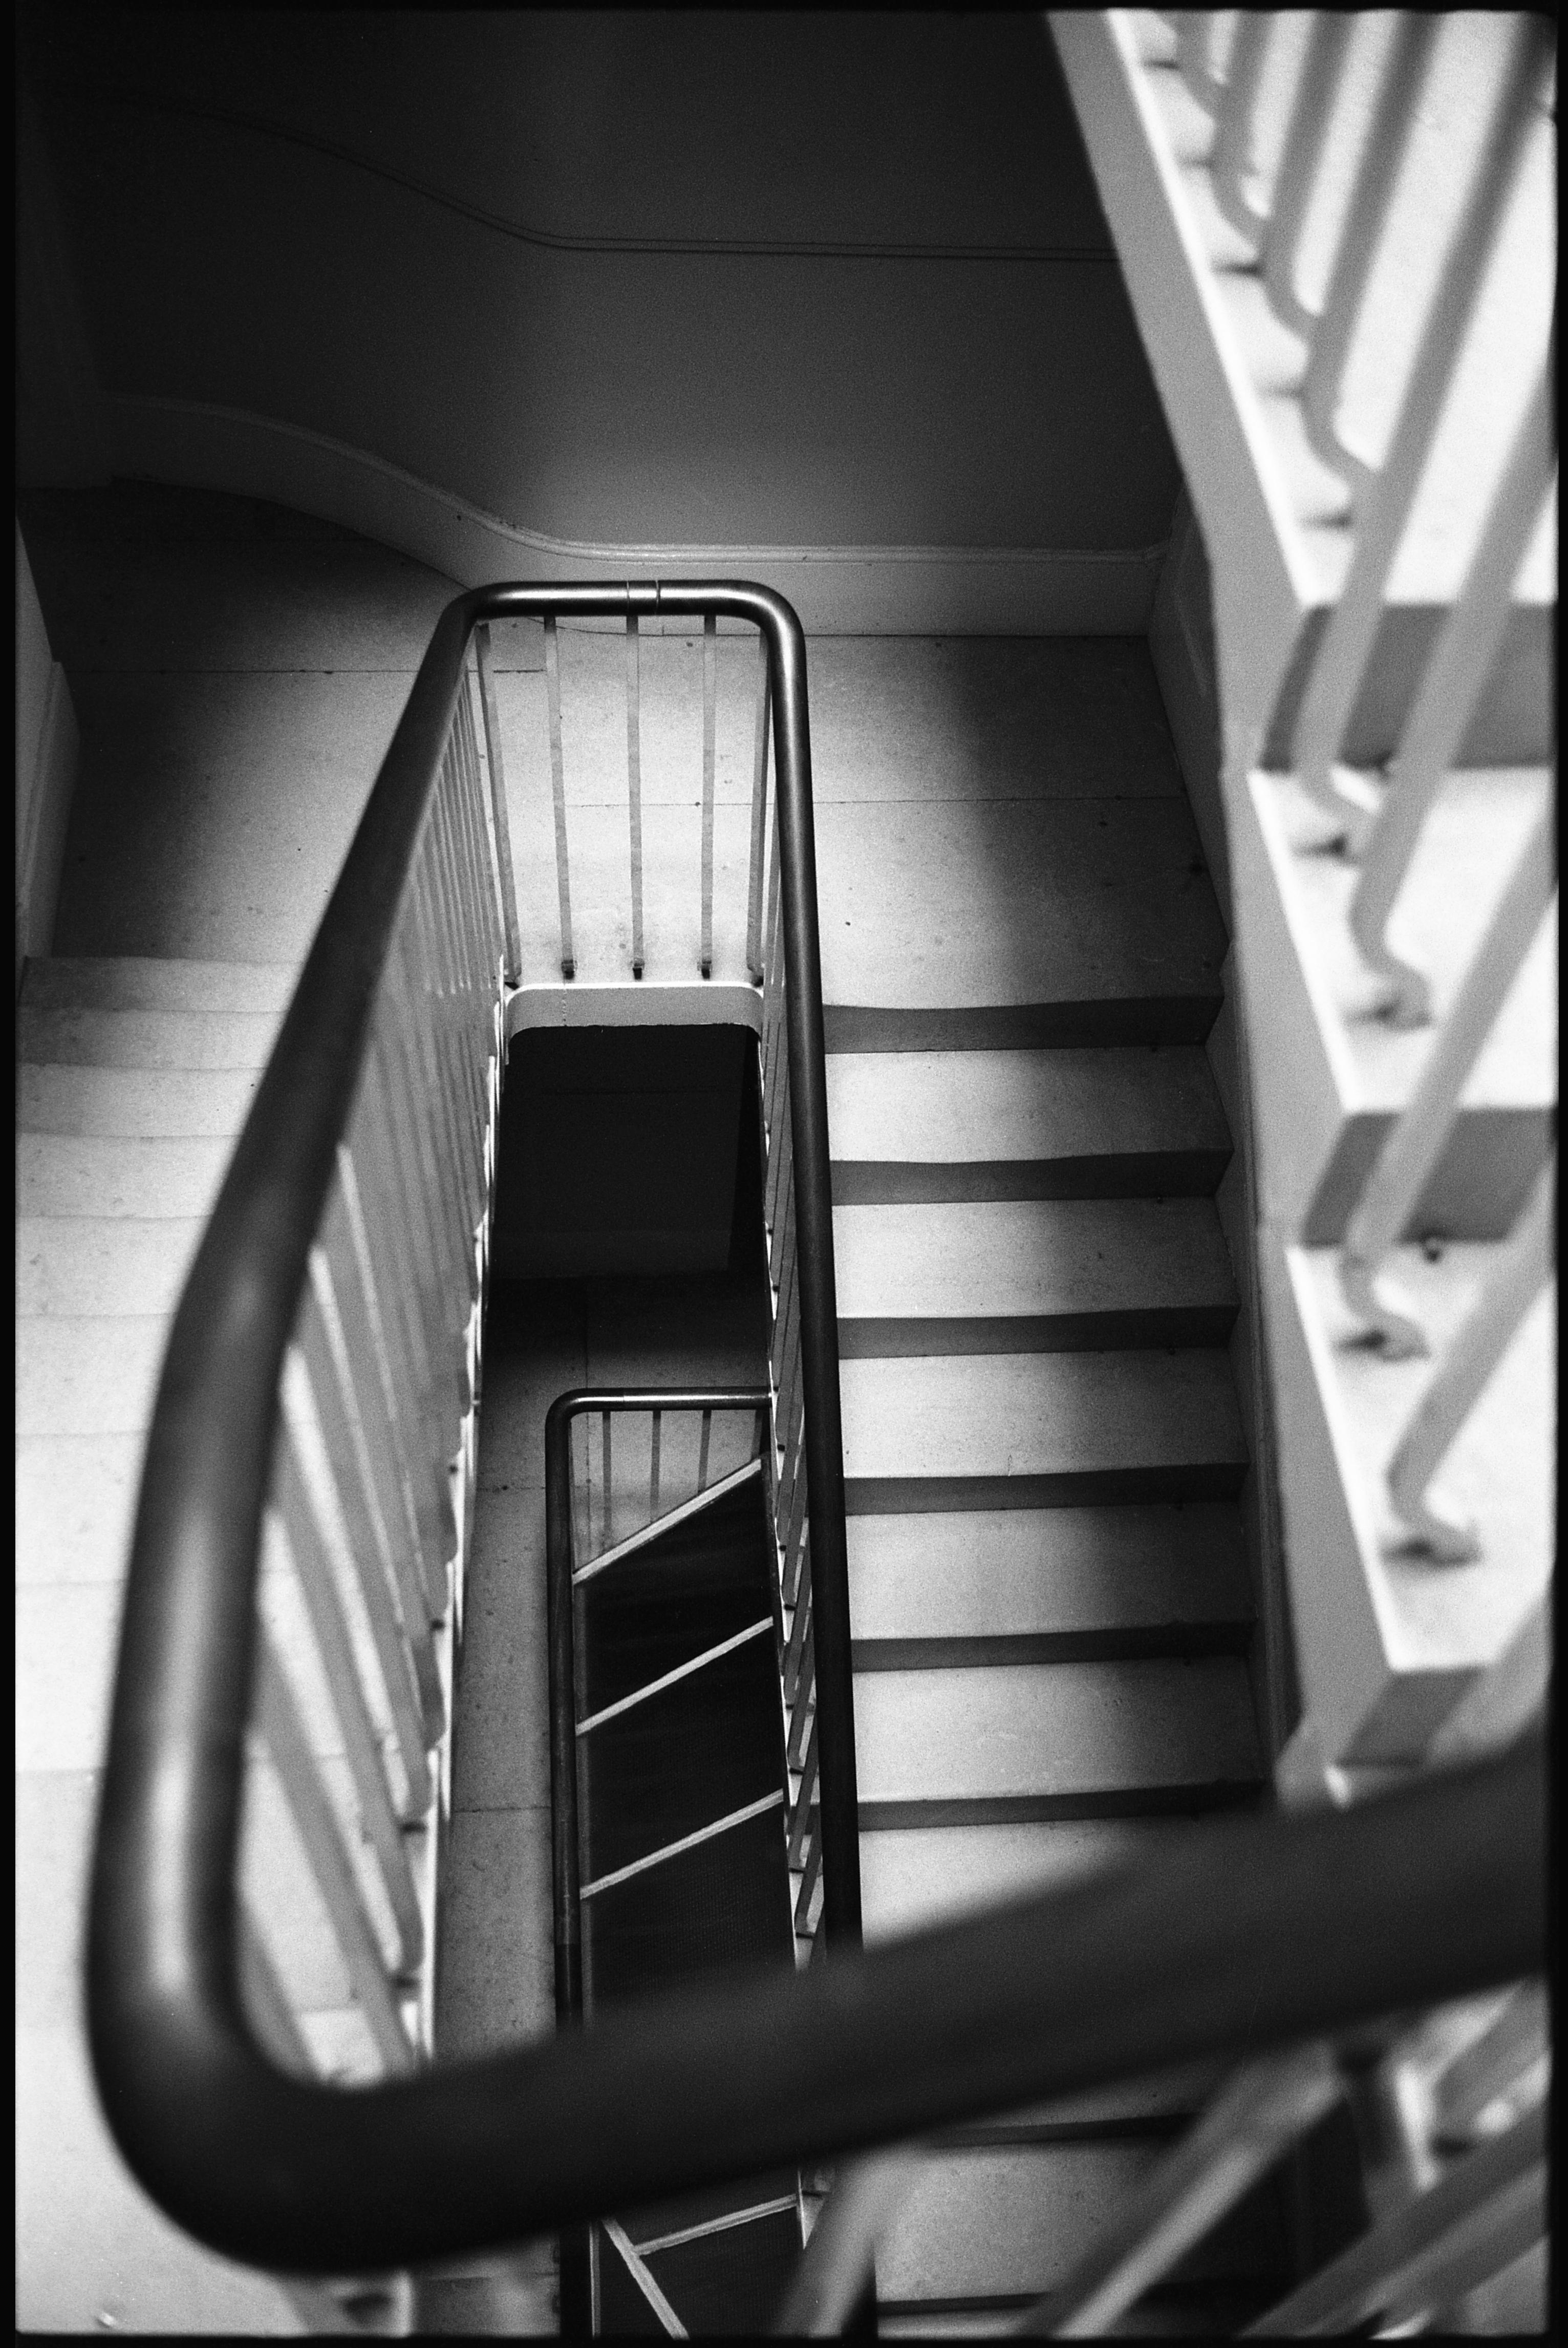 Paul Cooklin Black and White Photograph - Edition 1/10 Geometry, Staircase, Wimpole Estate, Photograph, Silver Hal/Gelatin